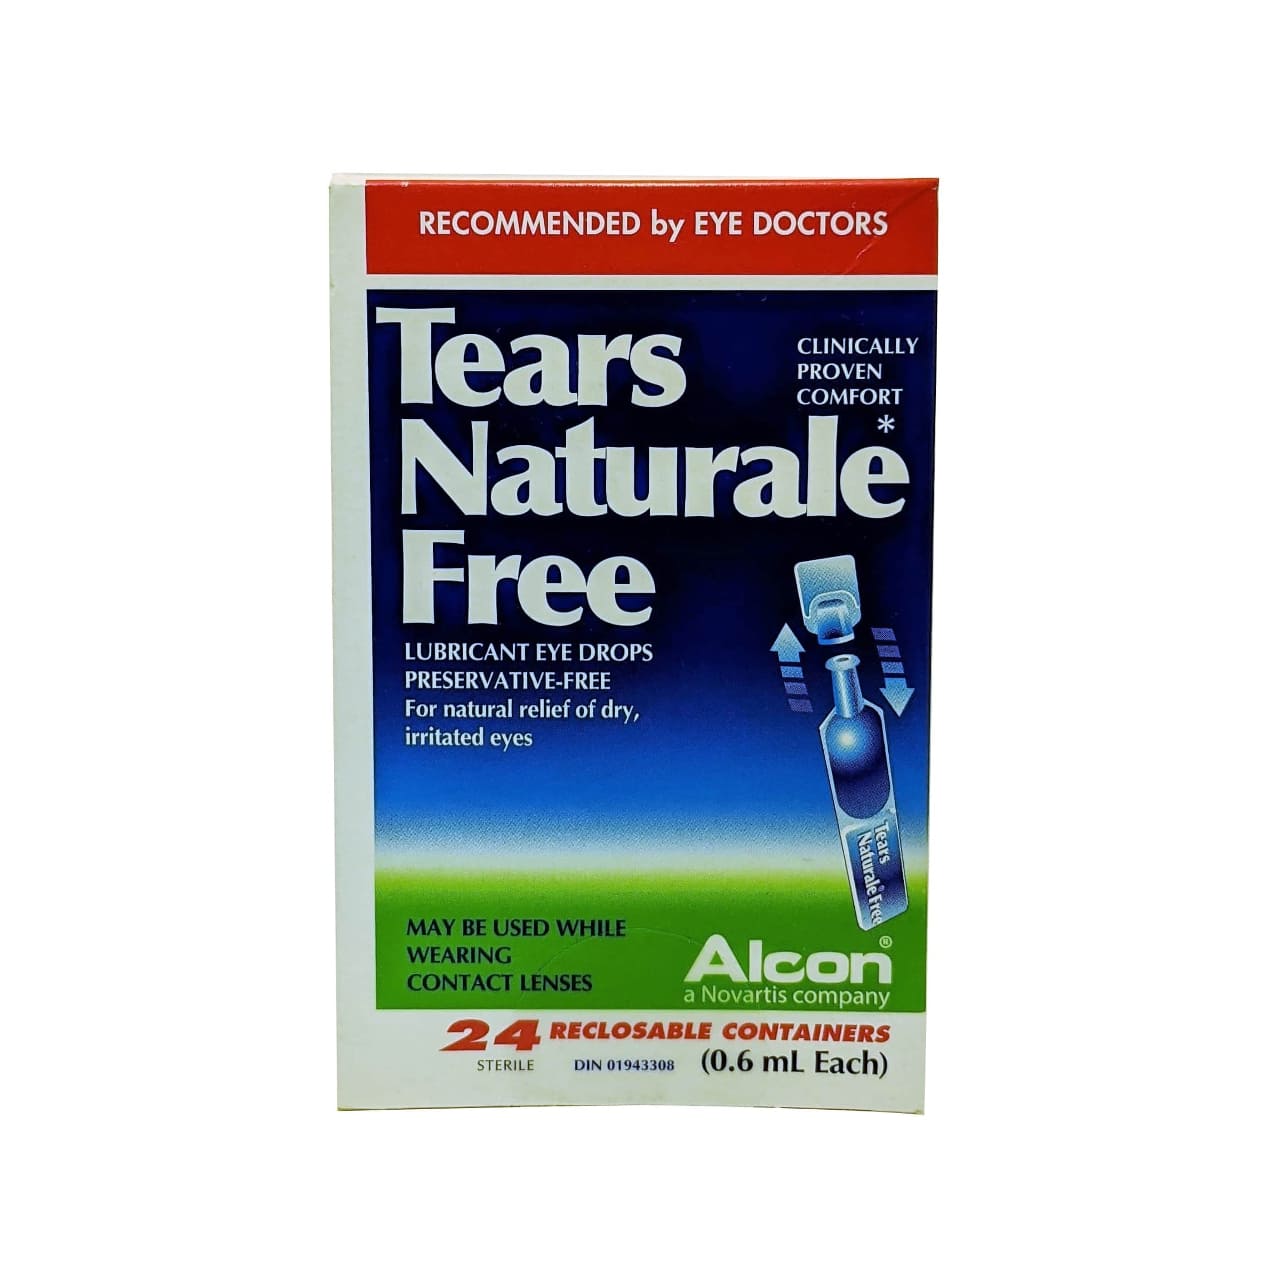 English product label for Alcon Tears Naturale Free Lubricant Eye Drops